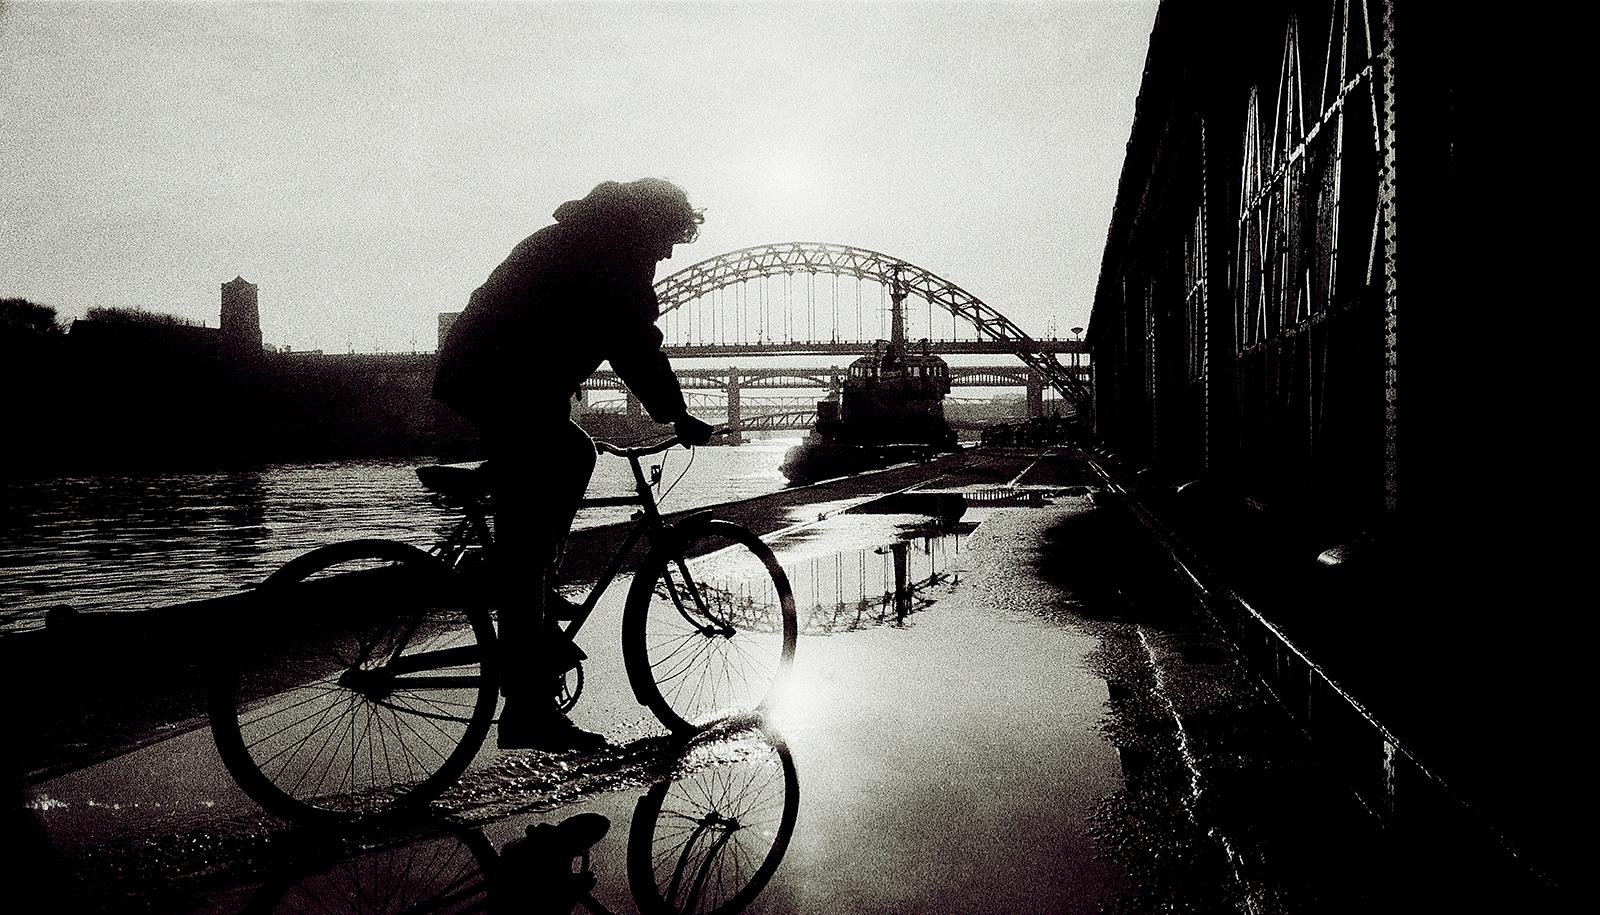 Newcastle - Signed limited edition fine art print, black and white photo, City - Black Landscape Photograph by Ian Sanderson